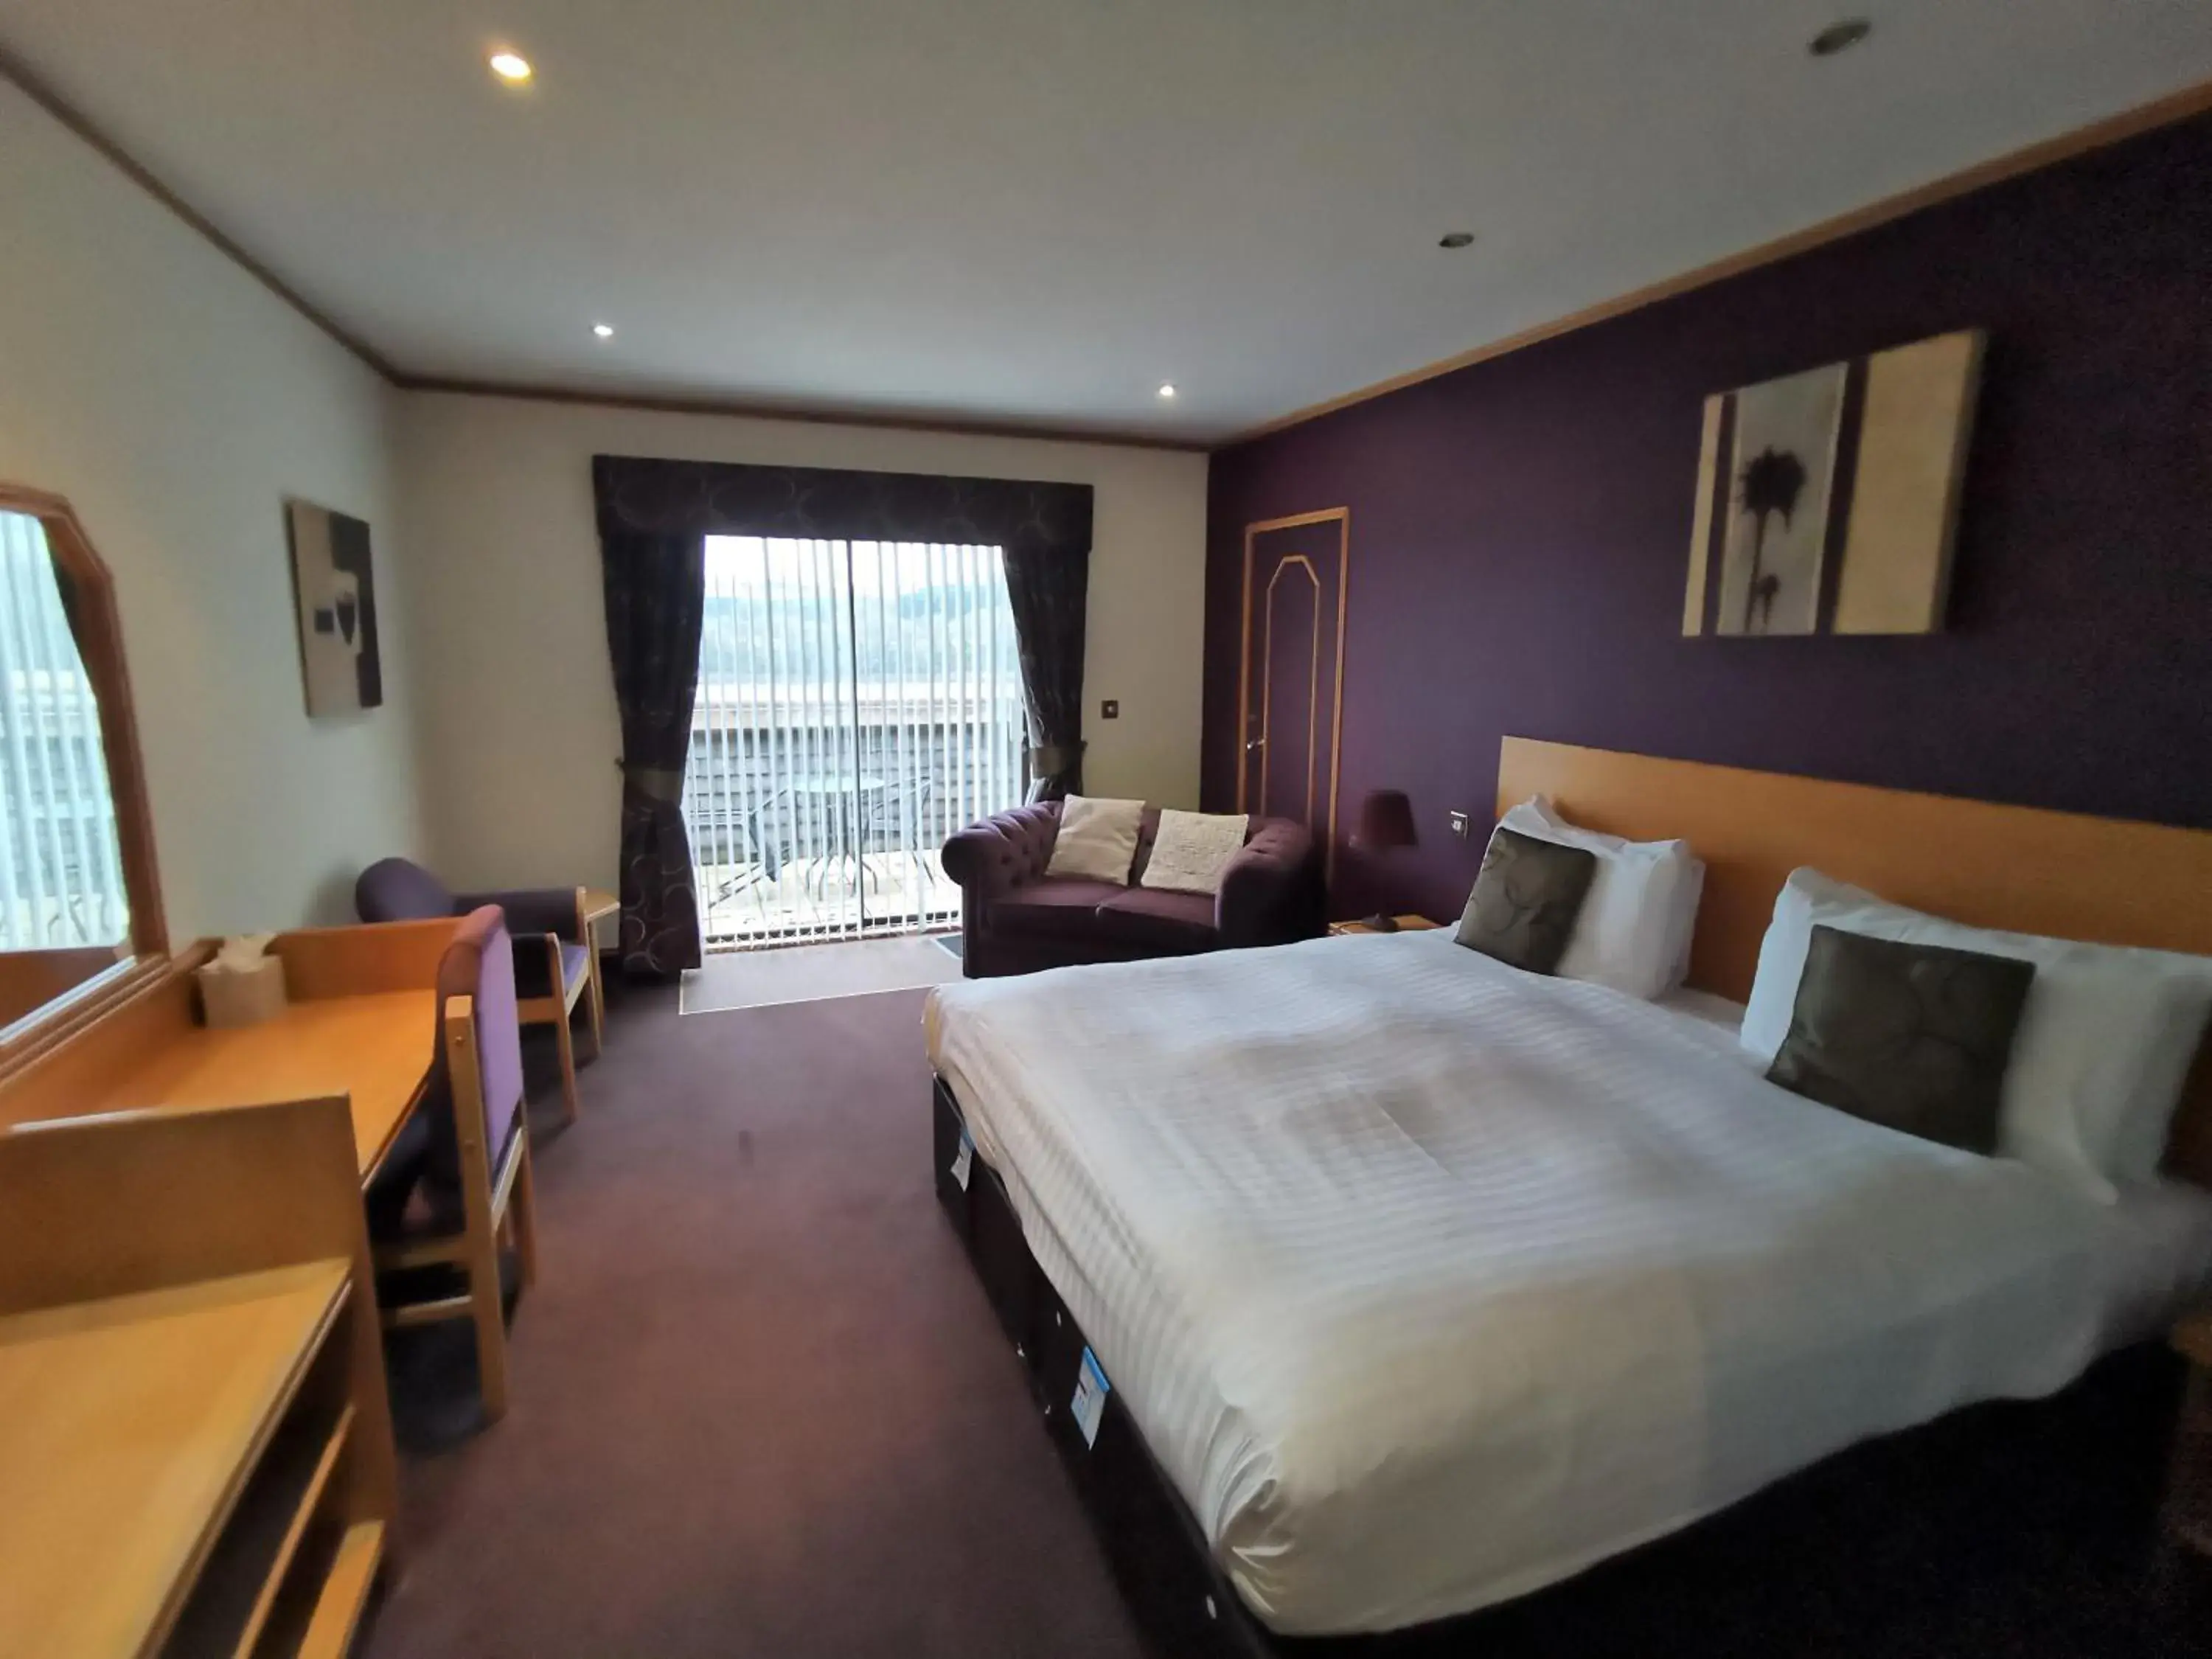 Deluxe Double Room with Balcony and River View in Passage House Hotel